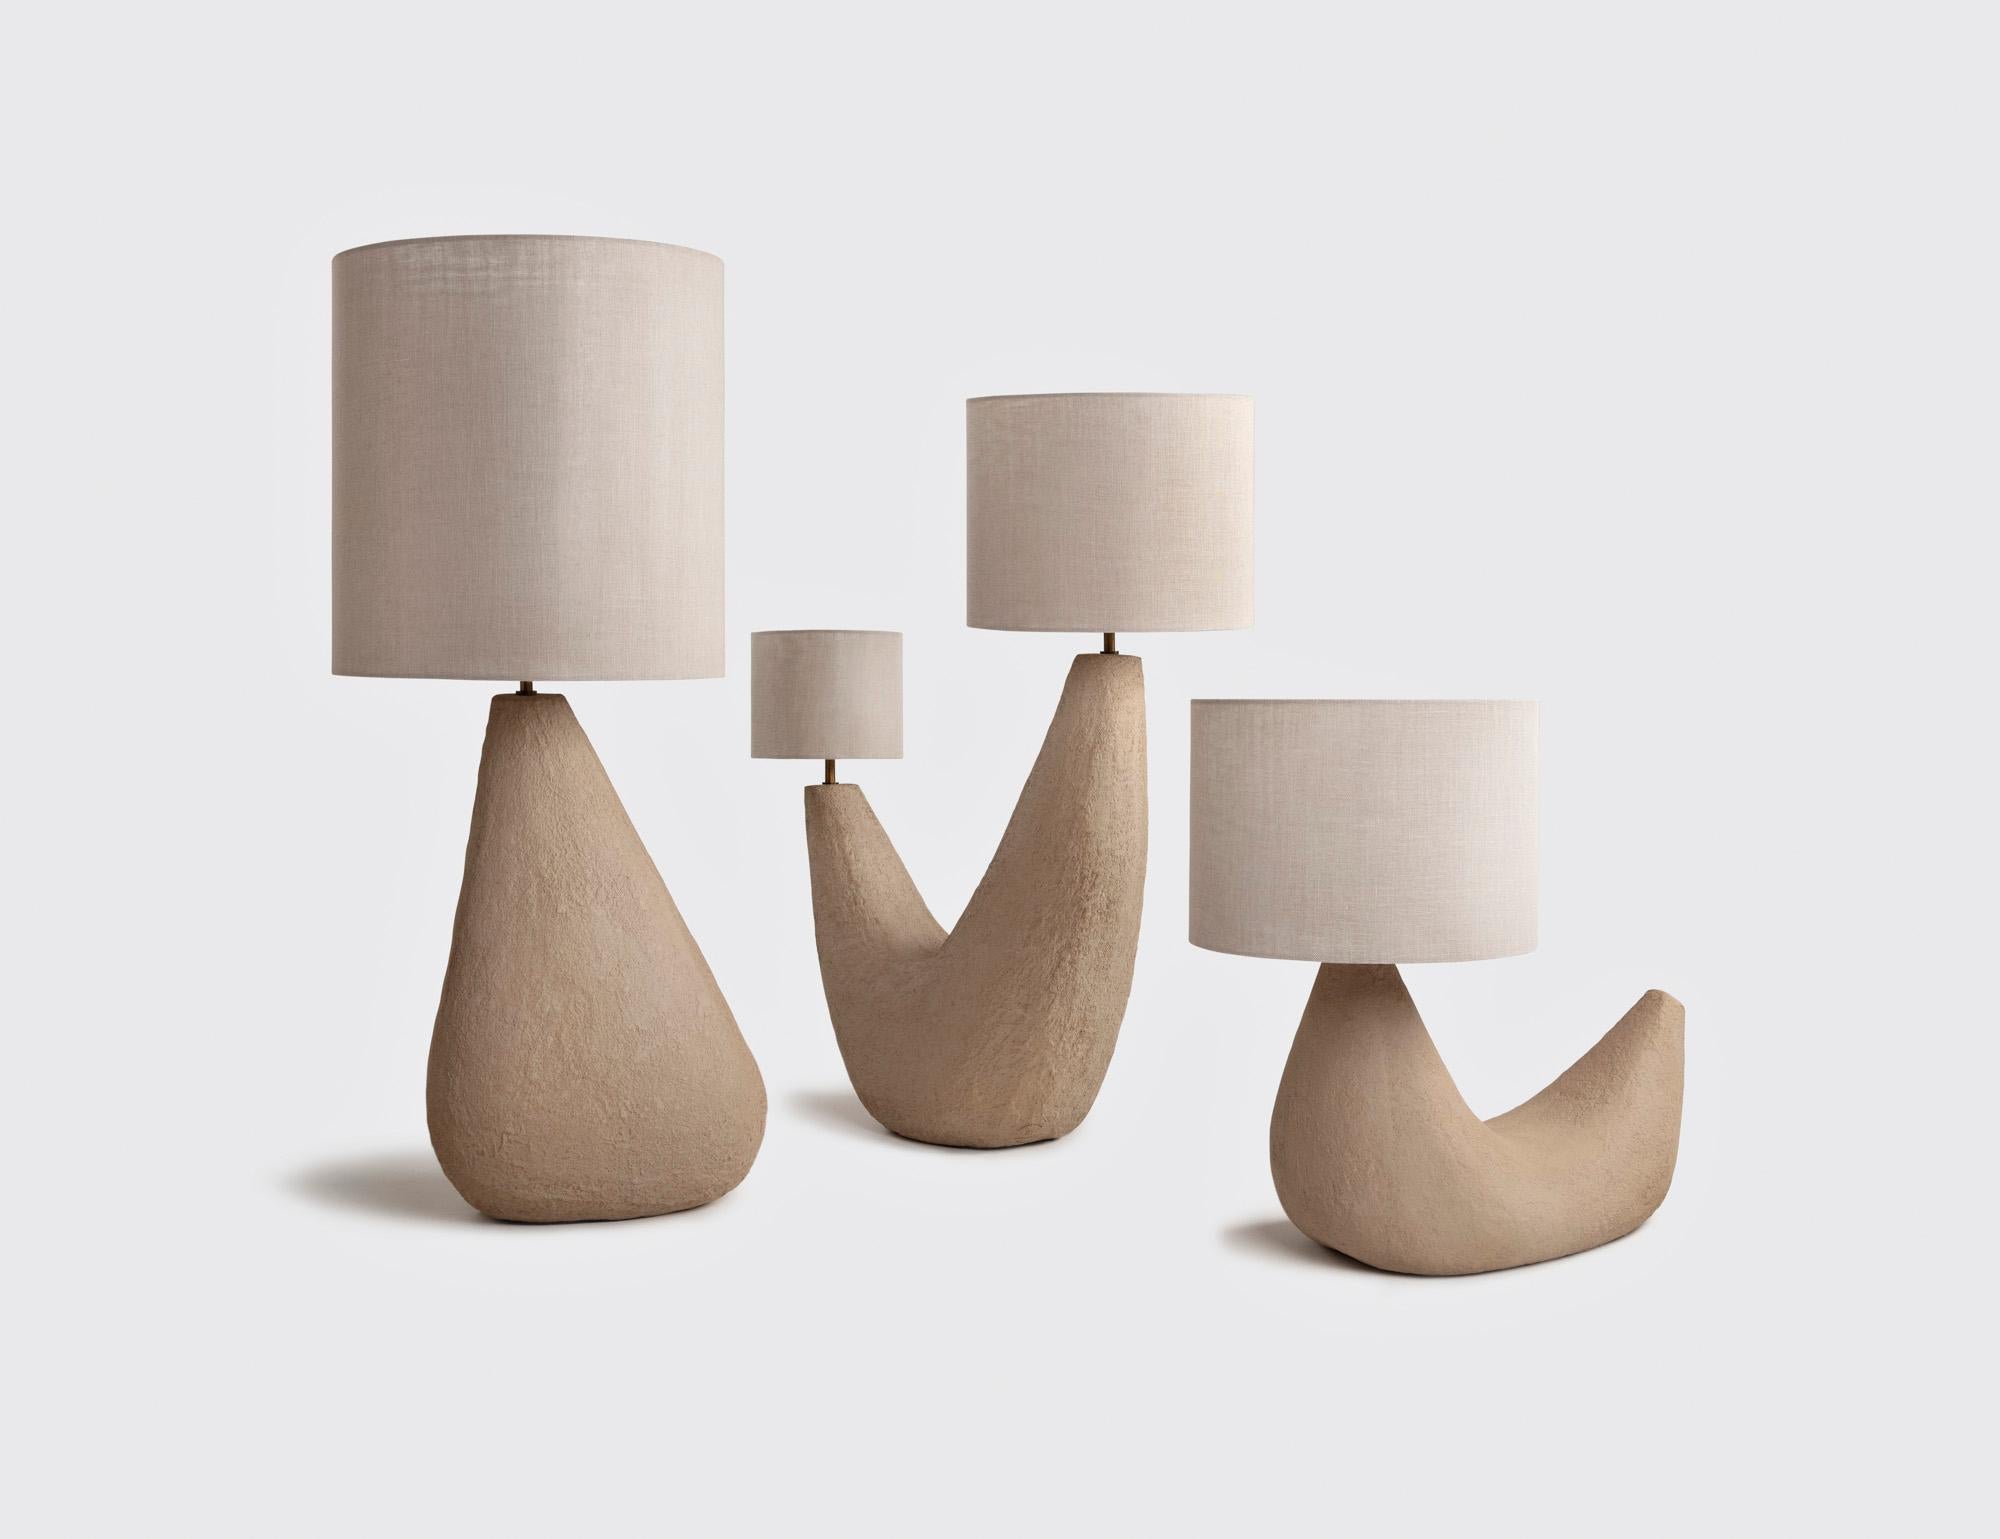 The emergence of studio objeto is linked to projects by Arthur Casas that had not found their way to completion. This collection of lamps had been in a drawer for years. In it, the architect plays with organic shapes that resemble pebbles,